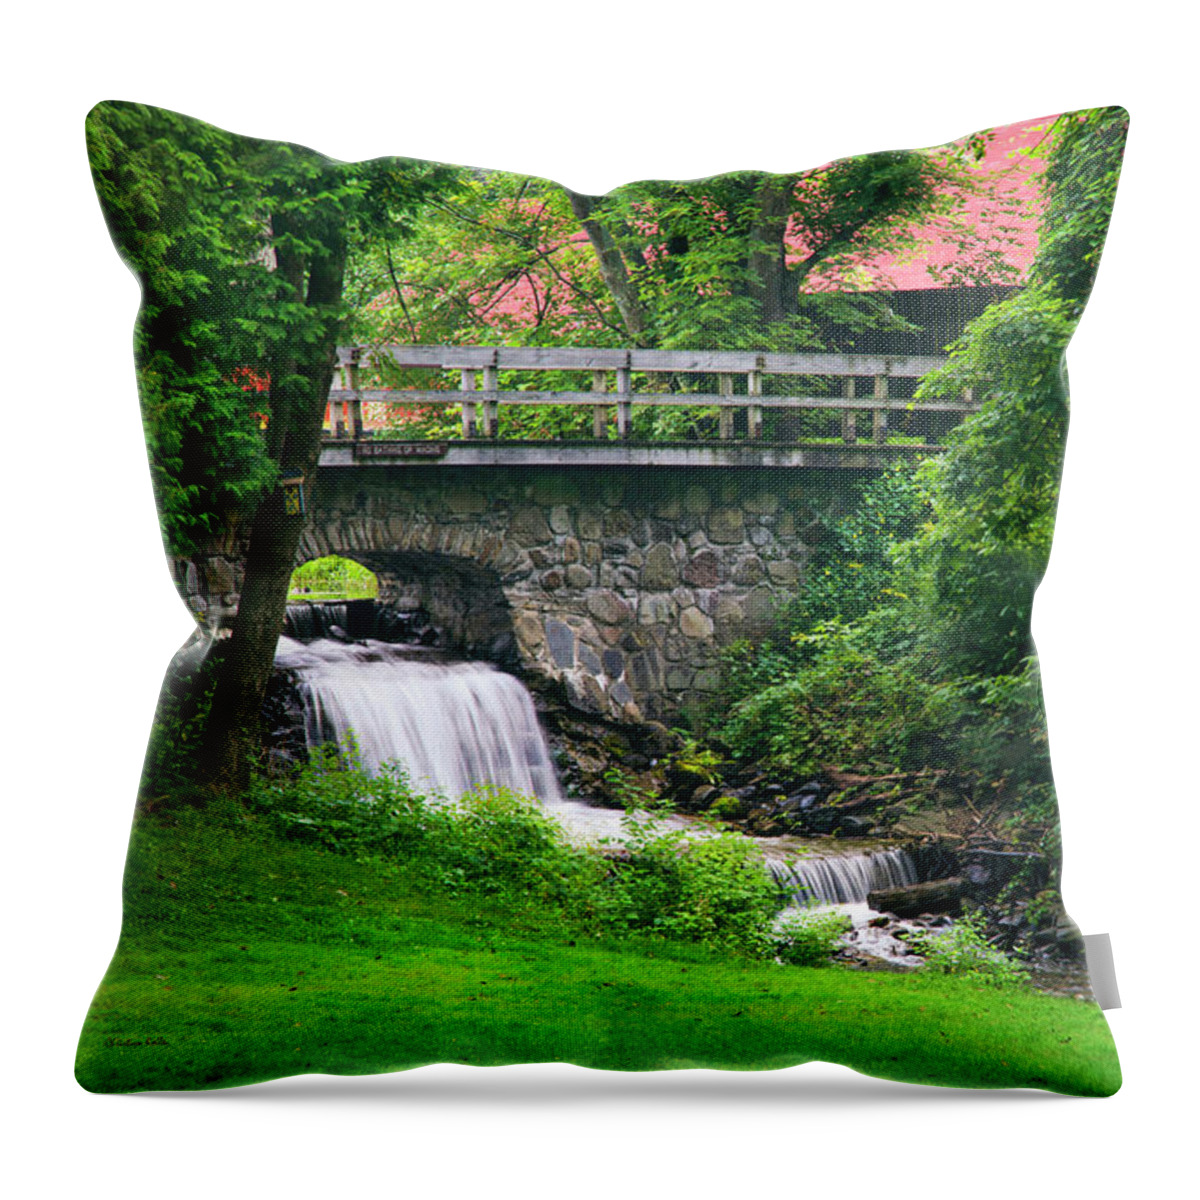 Waterfall Throw Pillow featuring the photograph Stone Bridge And Waterfall Landscape by Christina Rollo